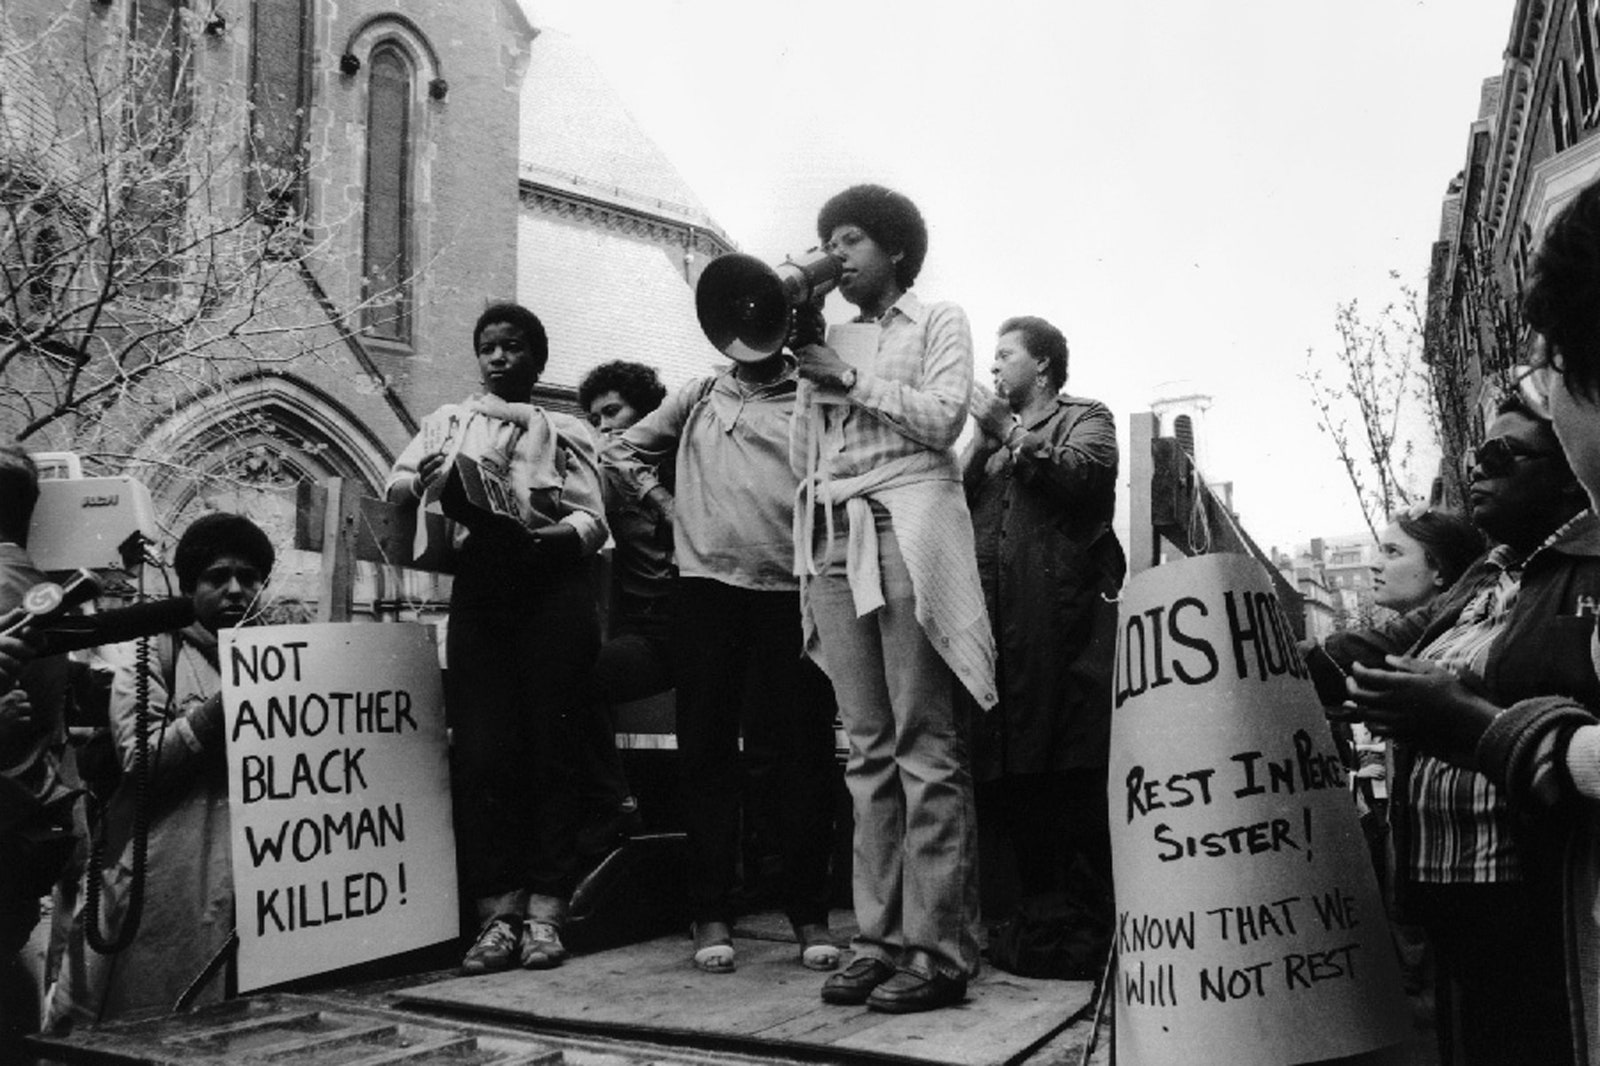 How the feminist movement in the 1960s in the US excluded Black women from fighting for equality